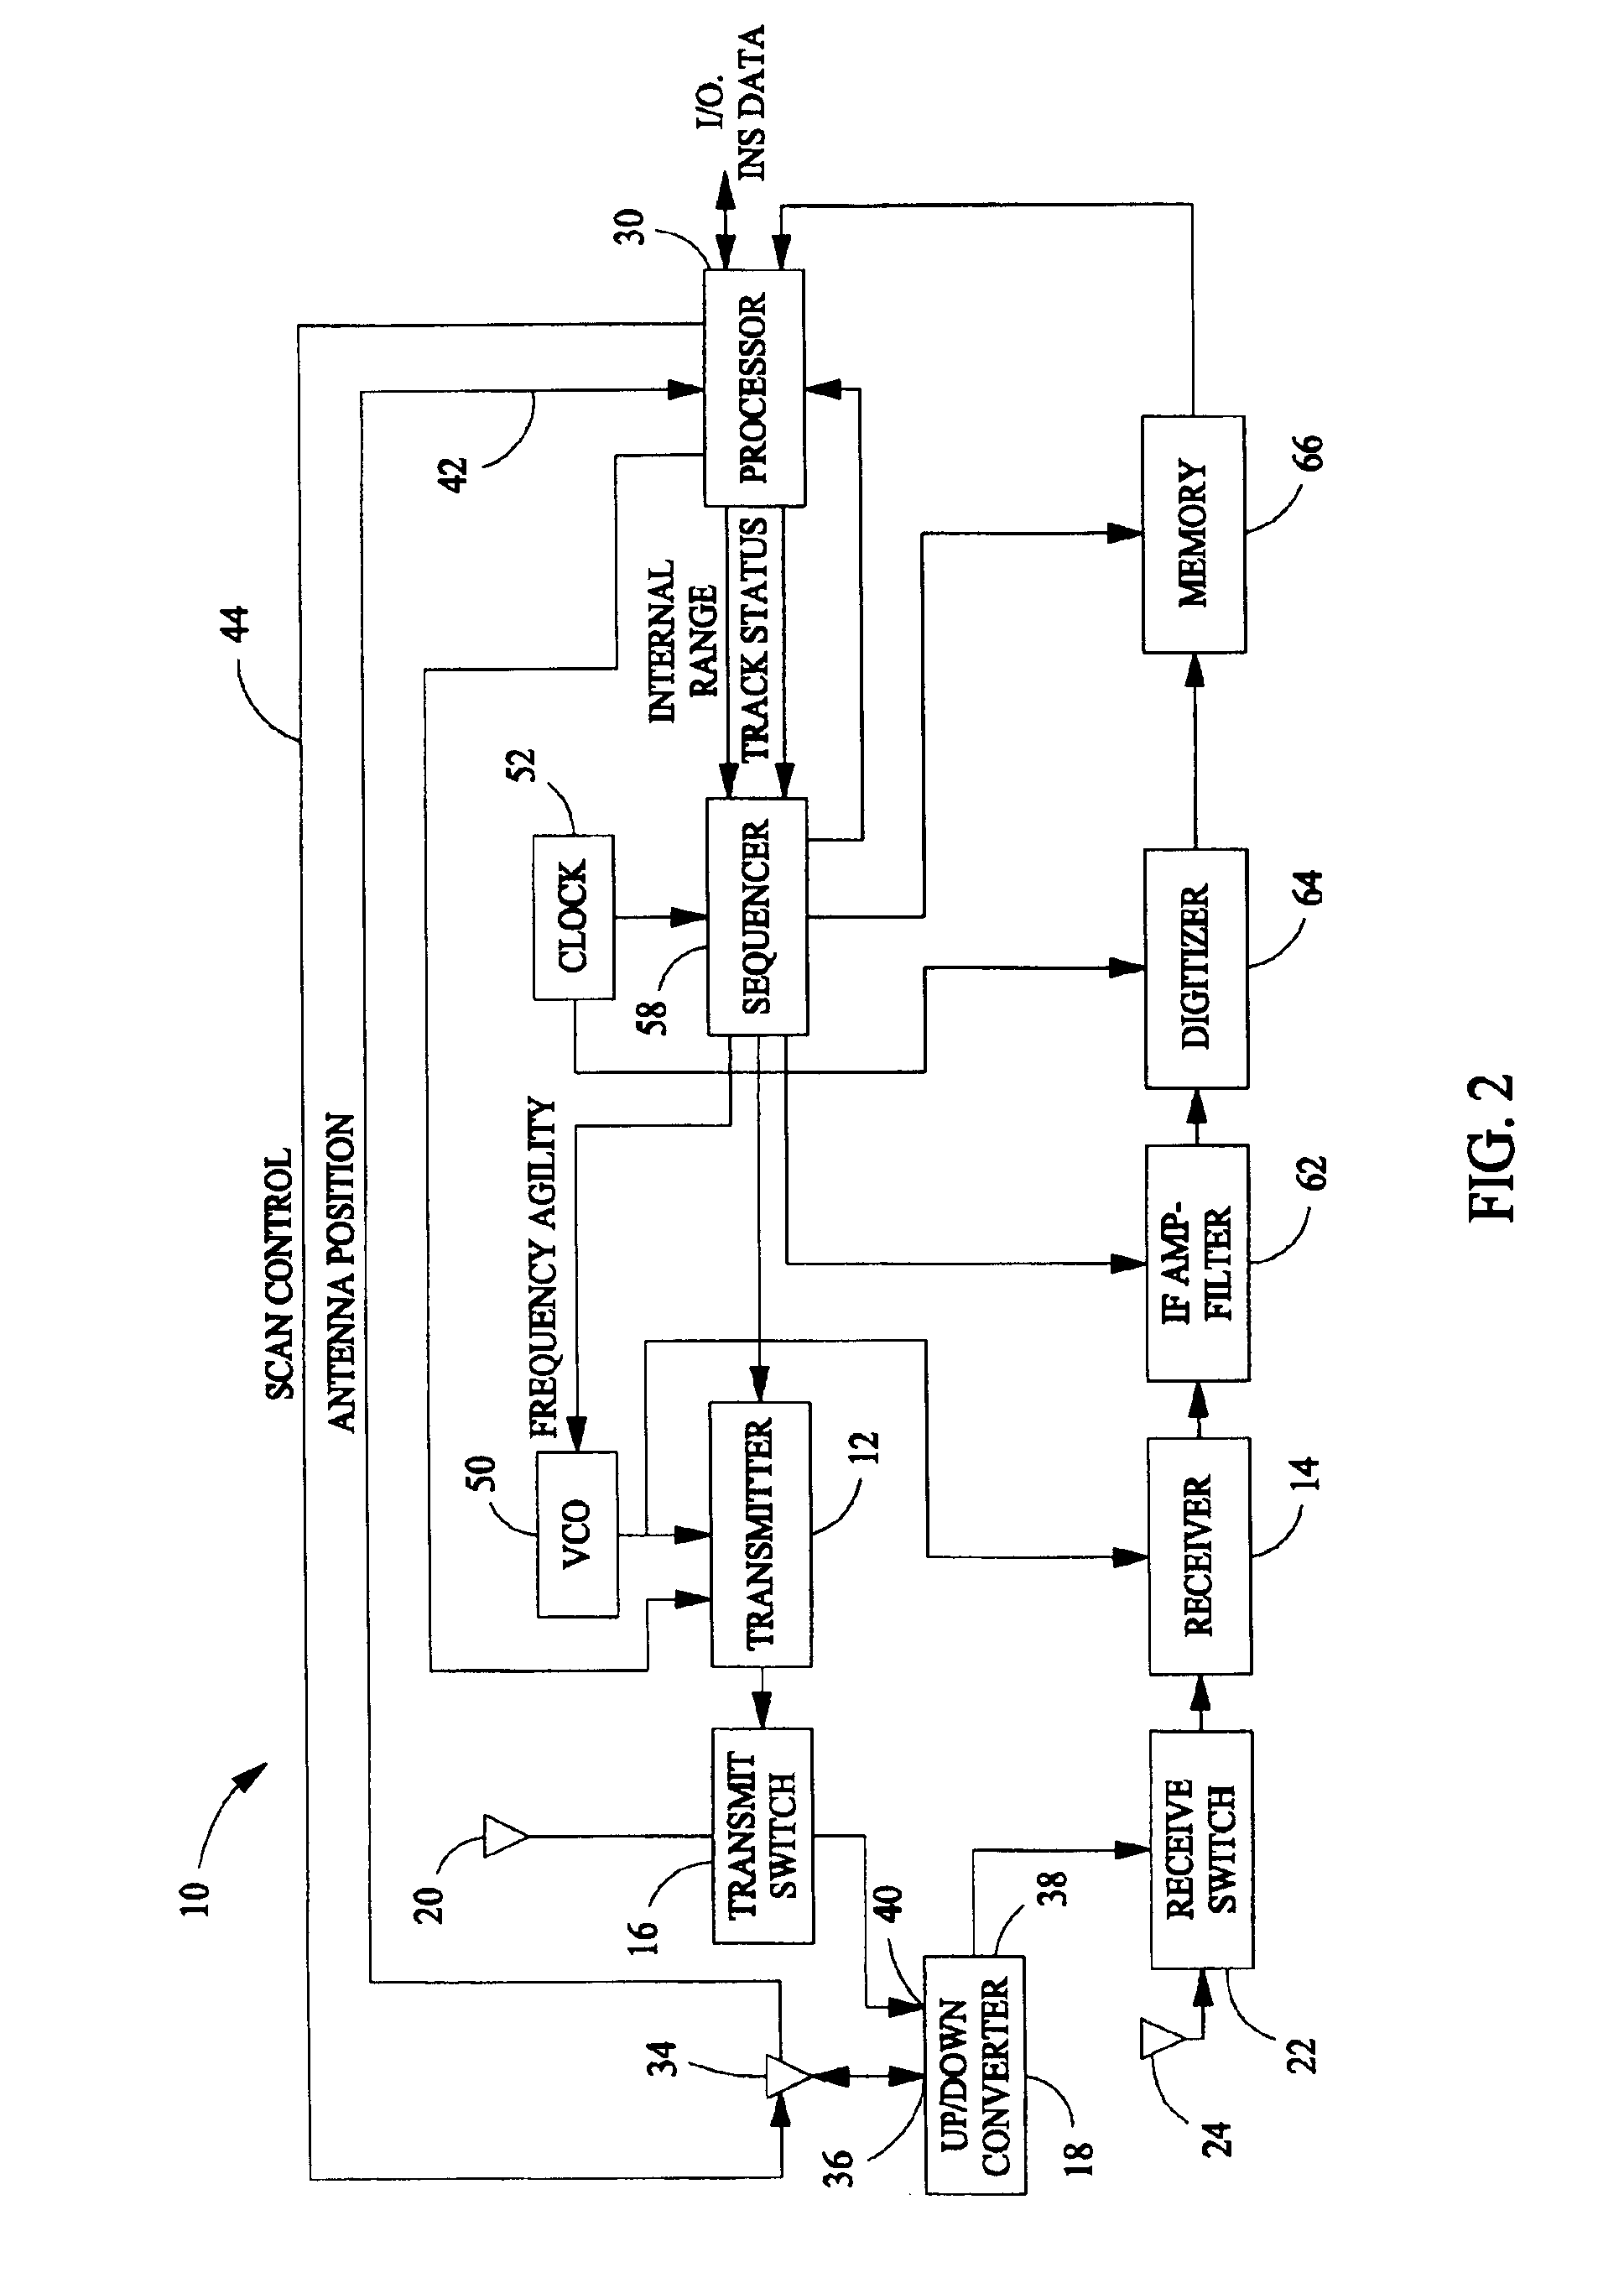 Methods and systems for detecting forward obstacles